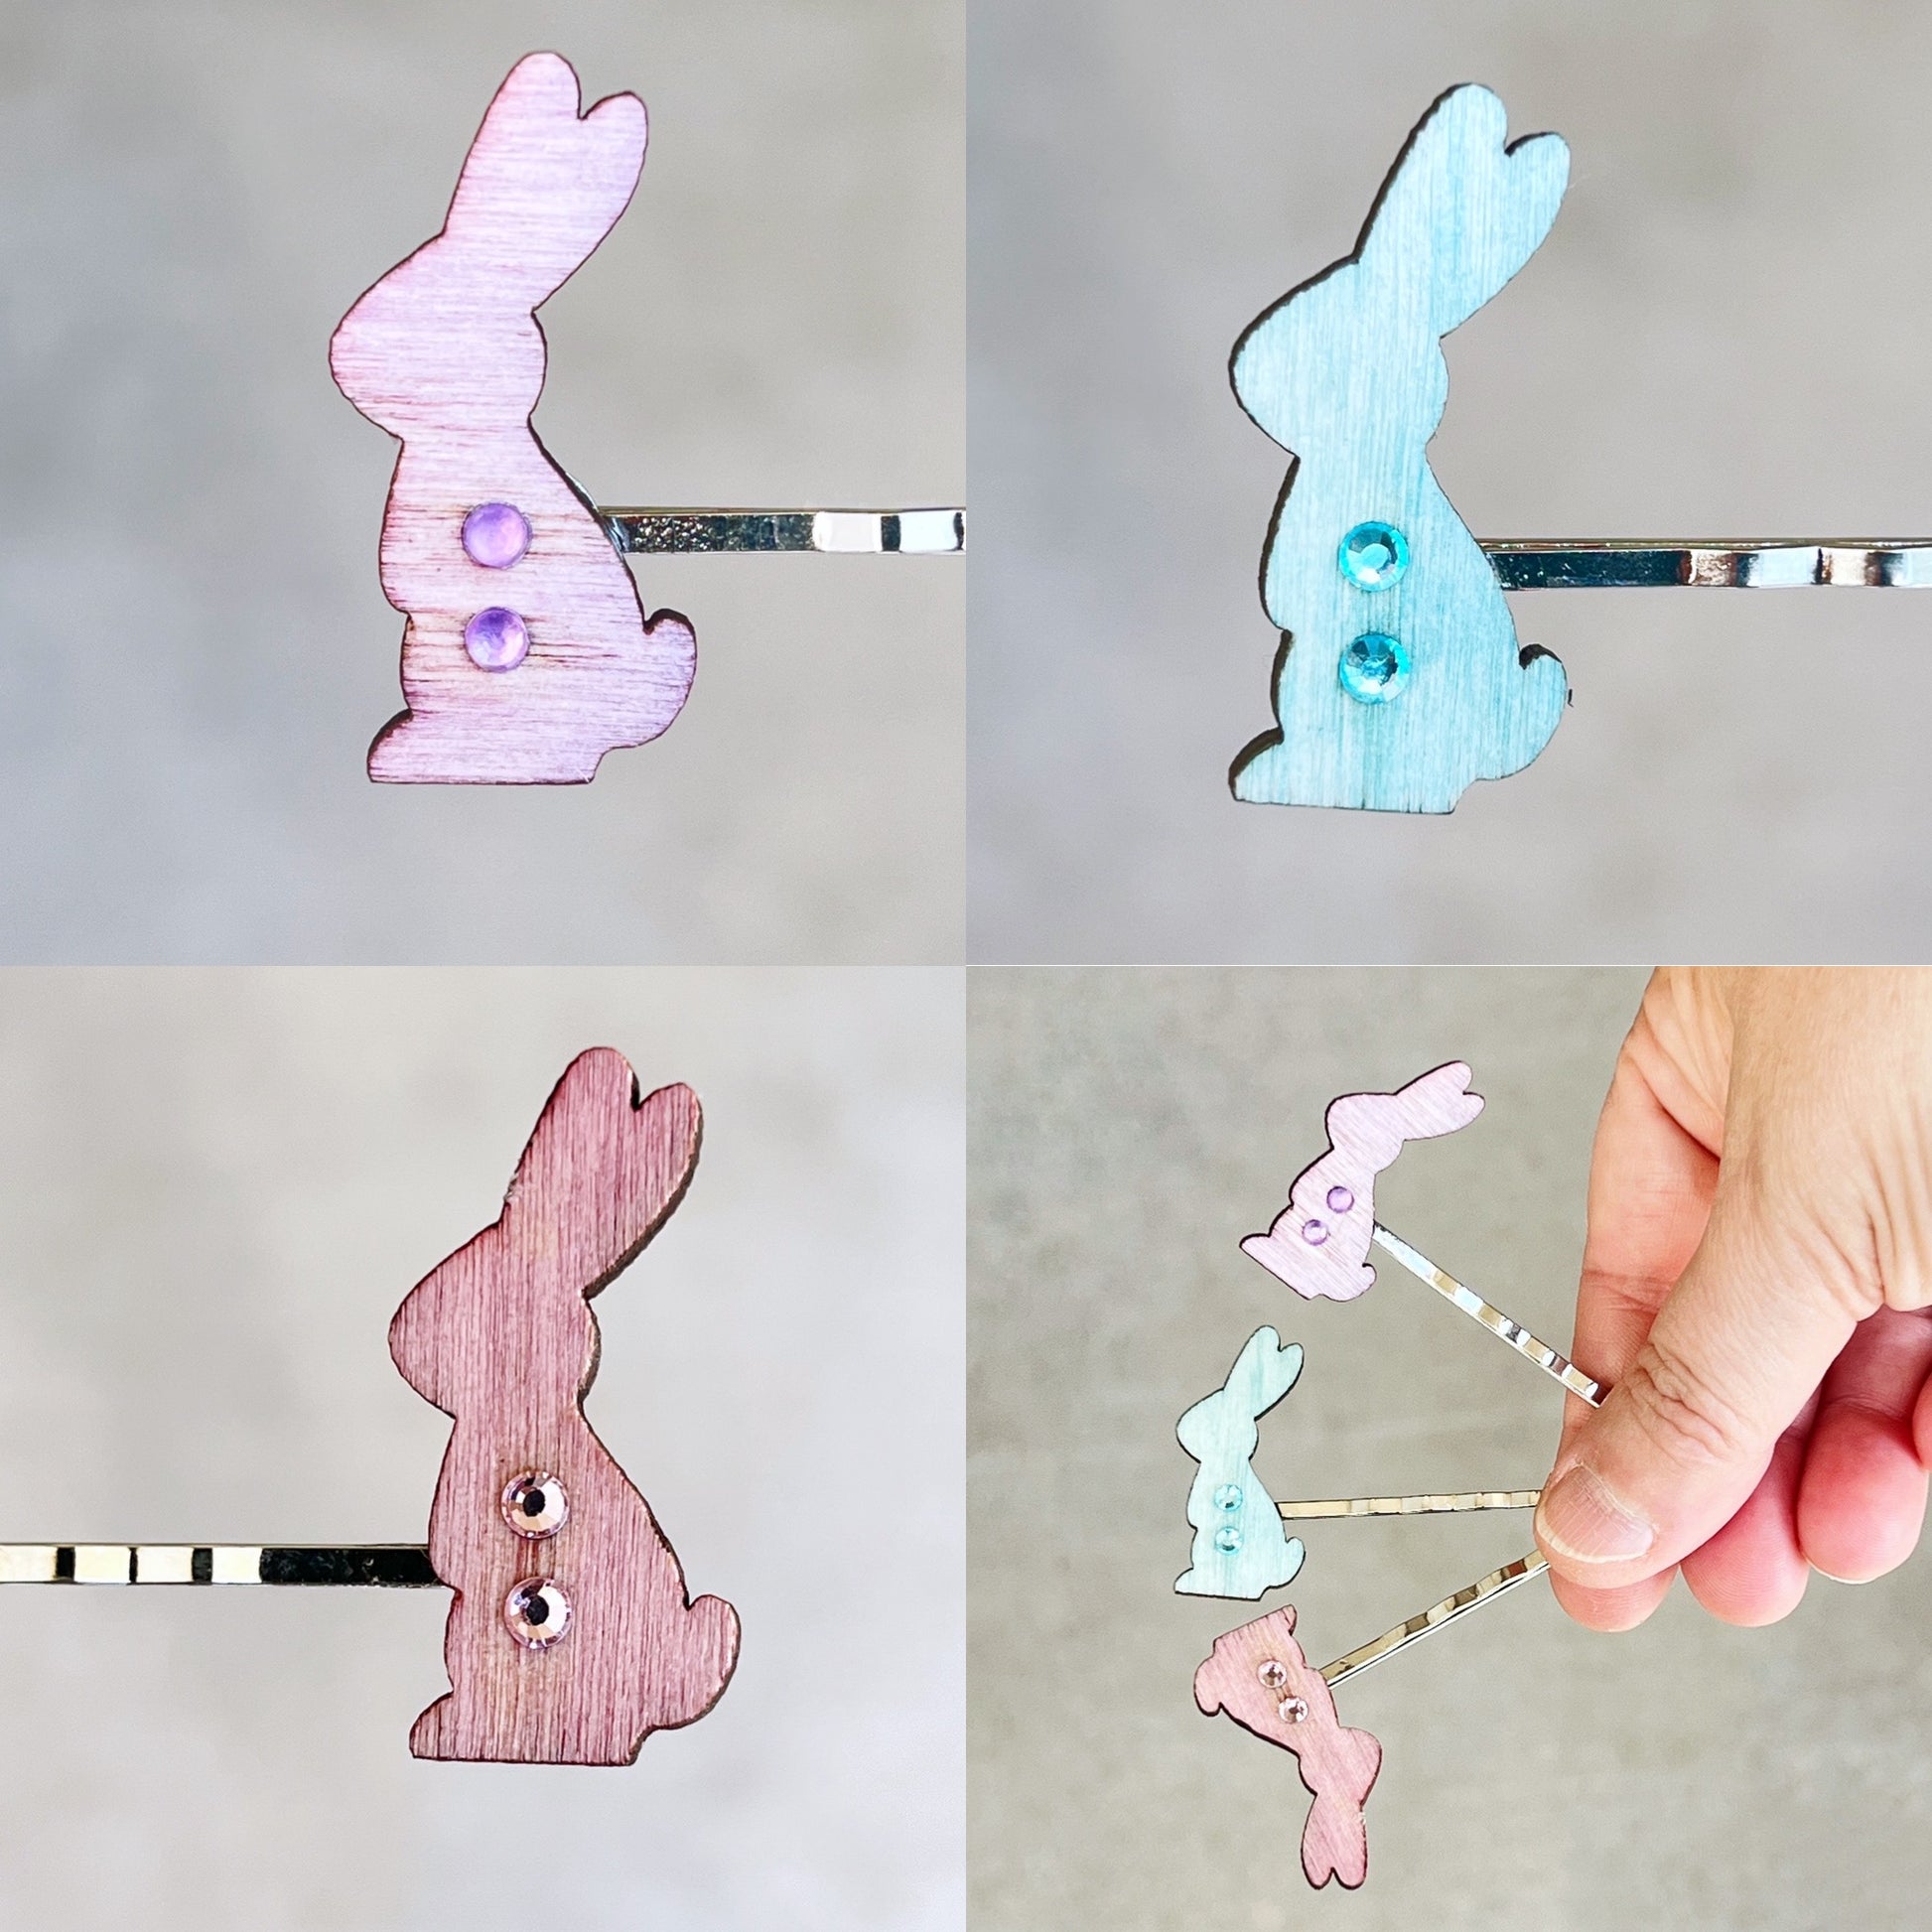 Bunny Rabbit Hair Pins - Easter Hair Accessories | Bunny Bobby Pins for Women's Hairstyles, Set of 3